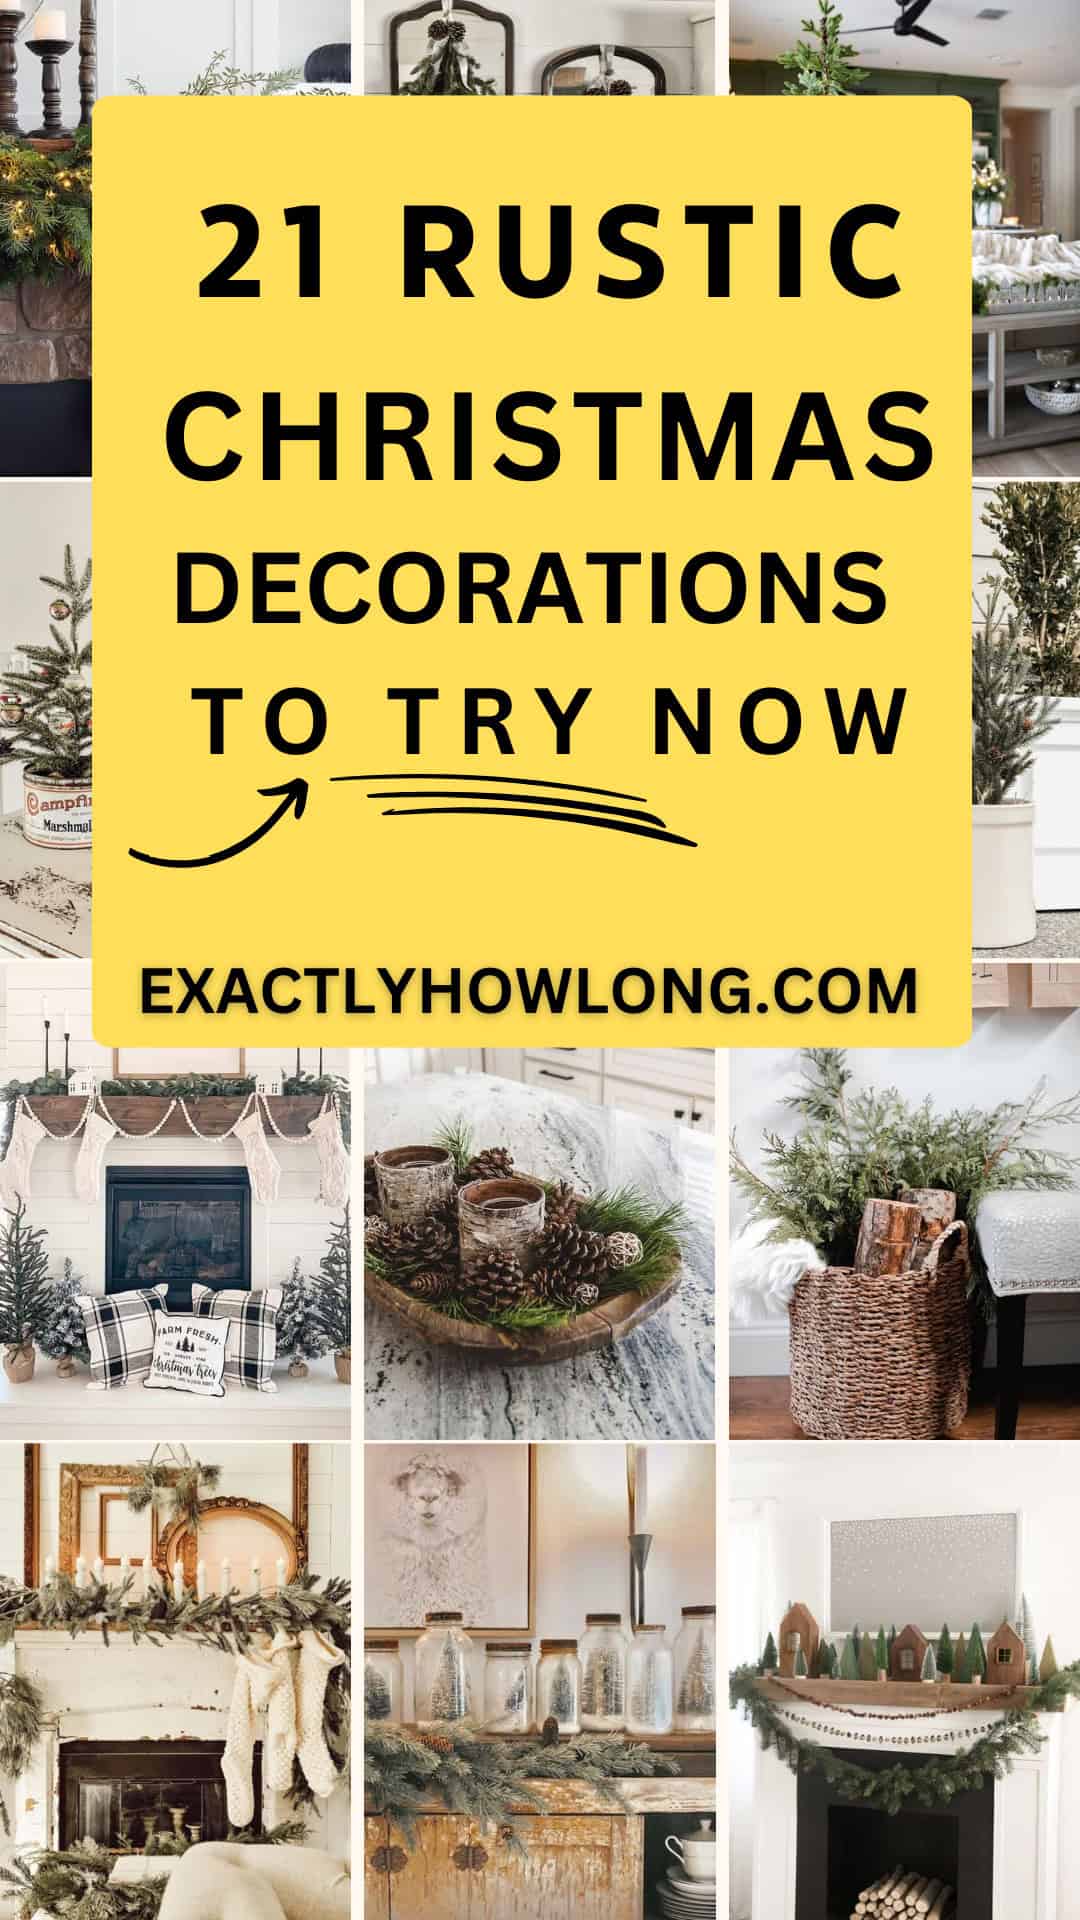 Easy DIY rustic Christmas decorations from Dollar Tree